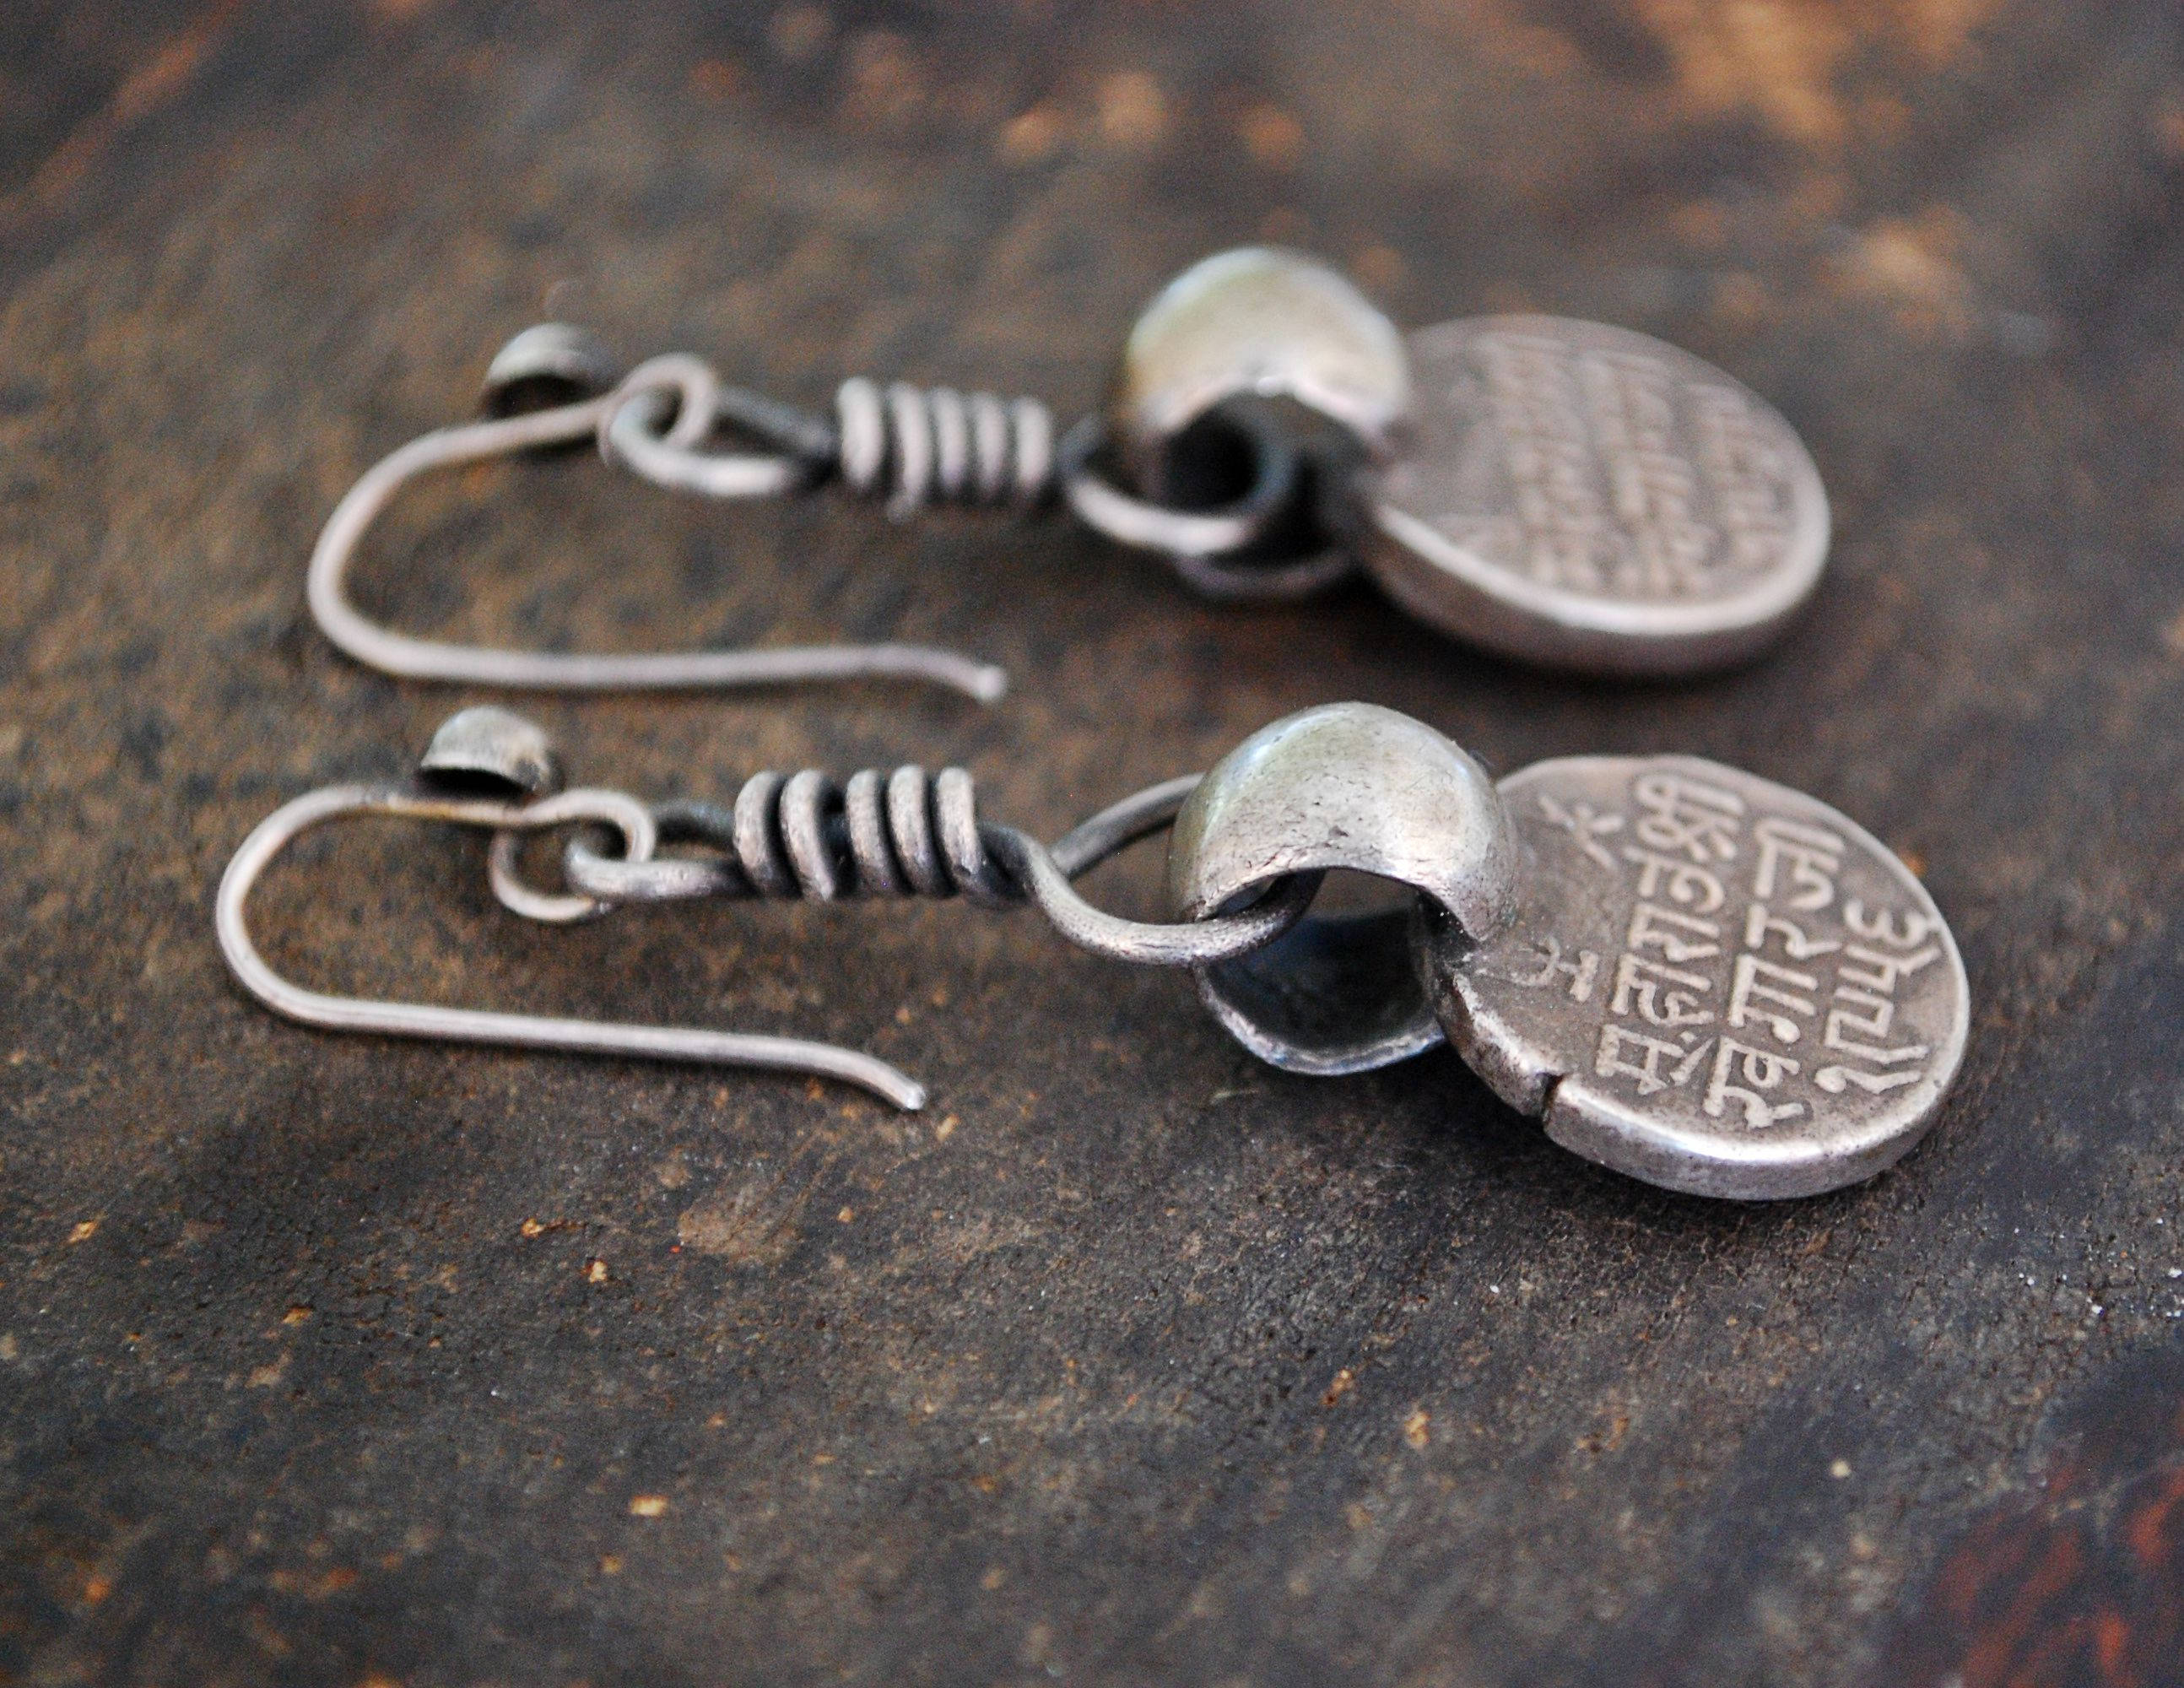 Old India Coin Dangle Earrings